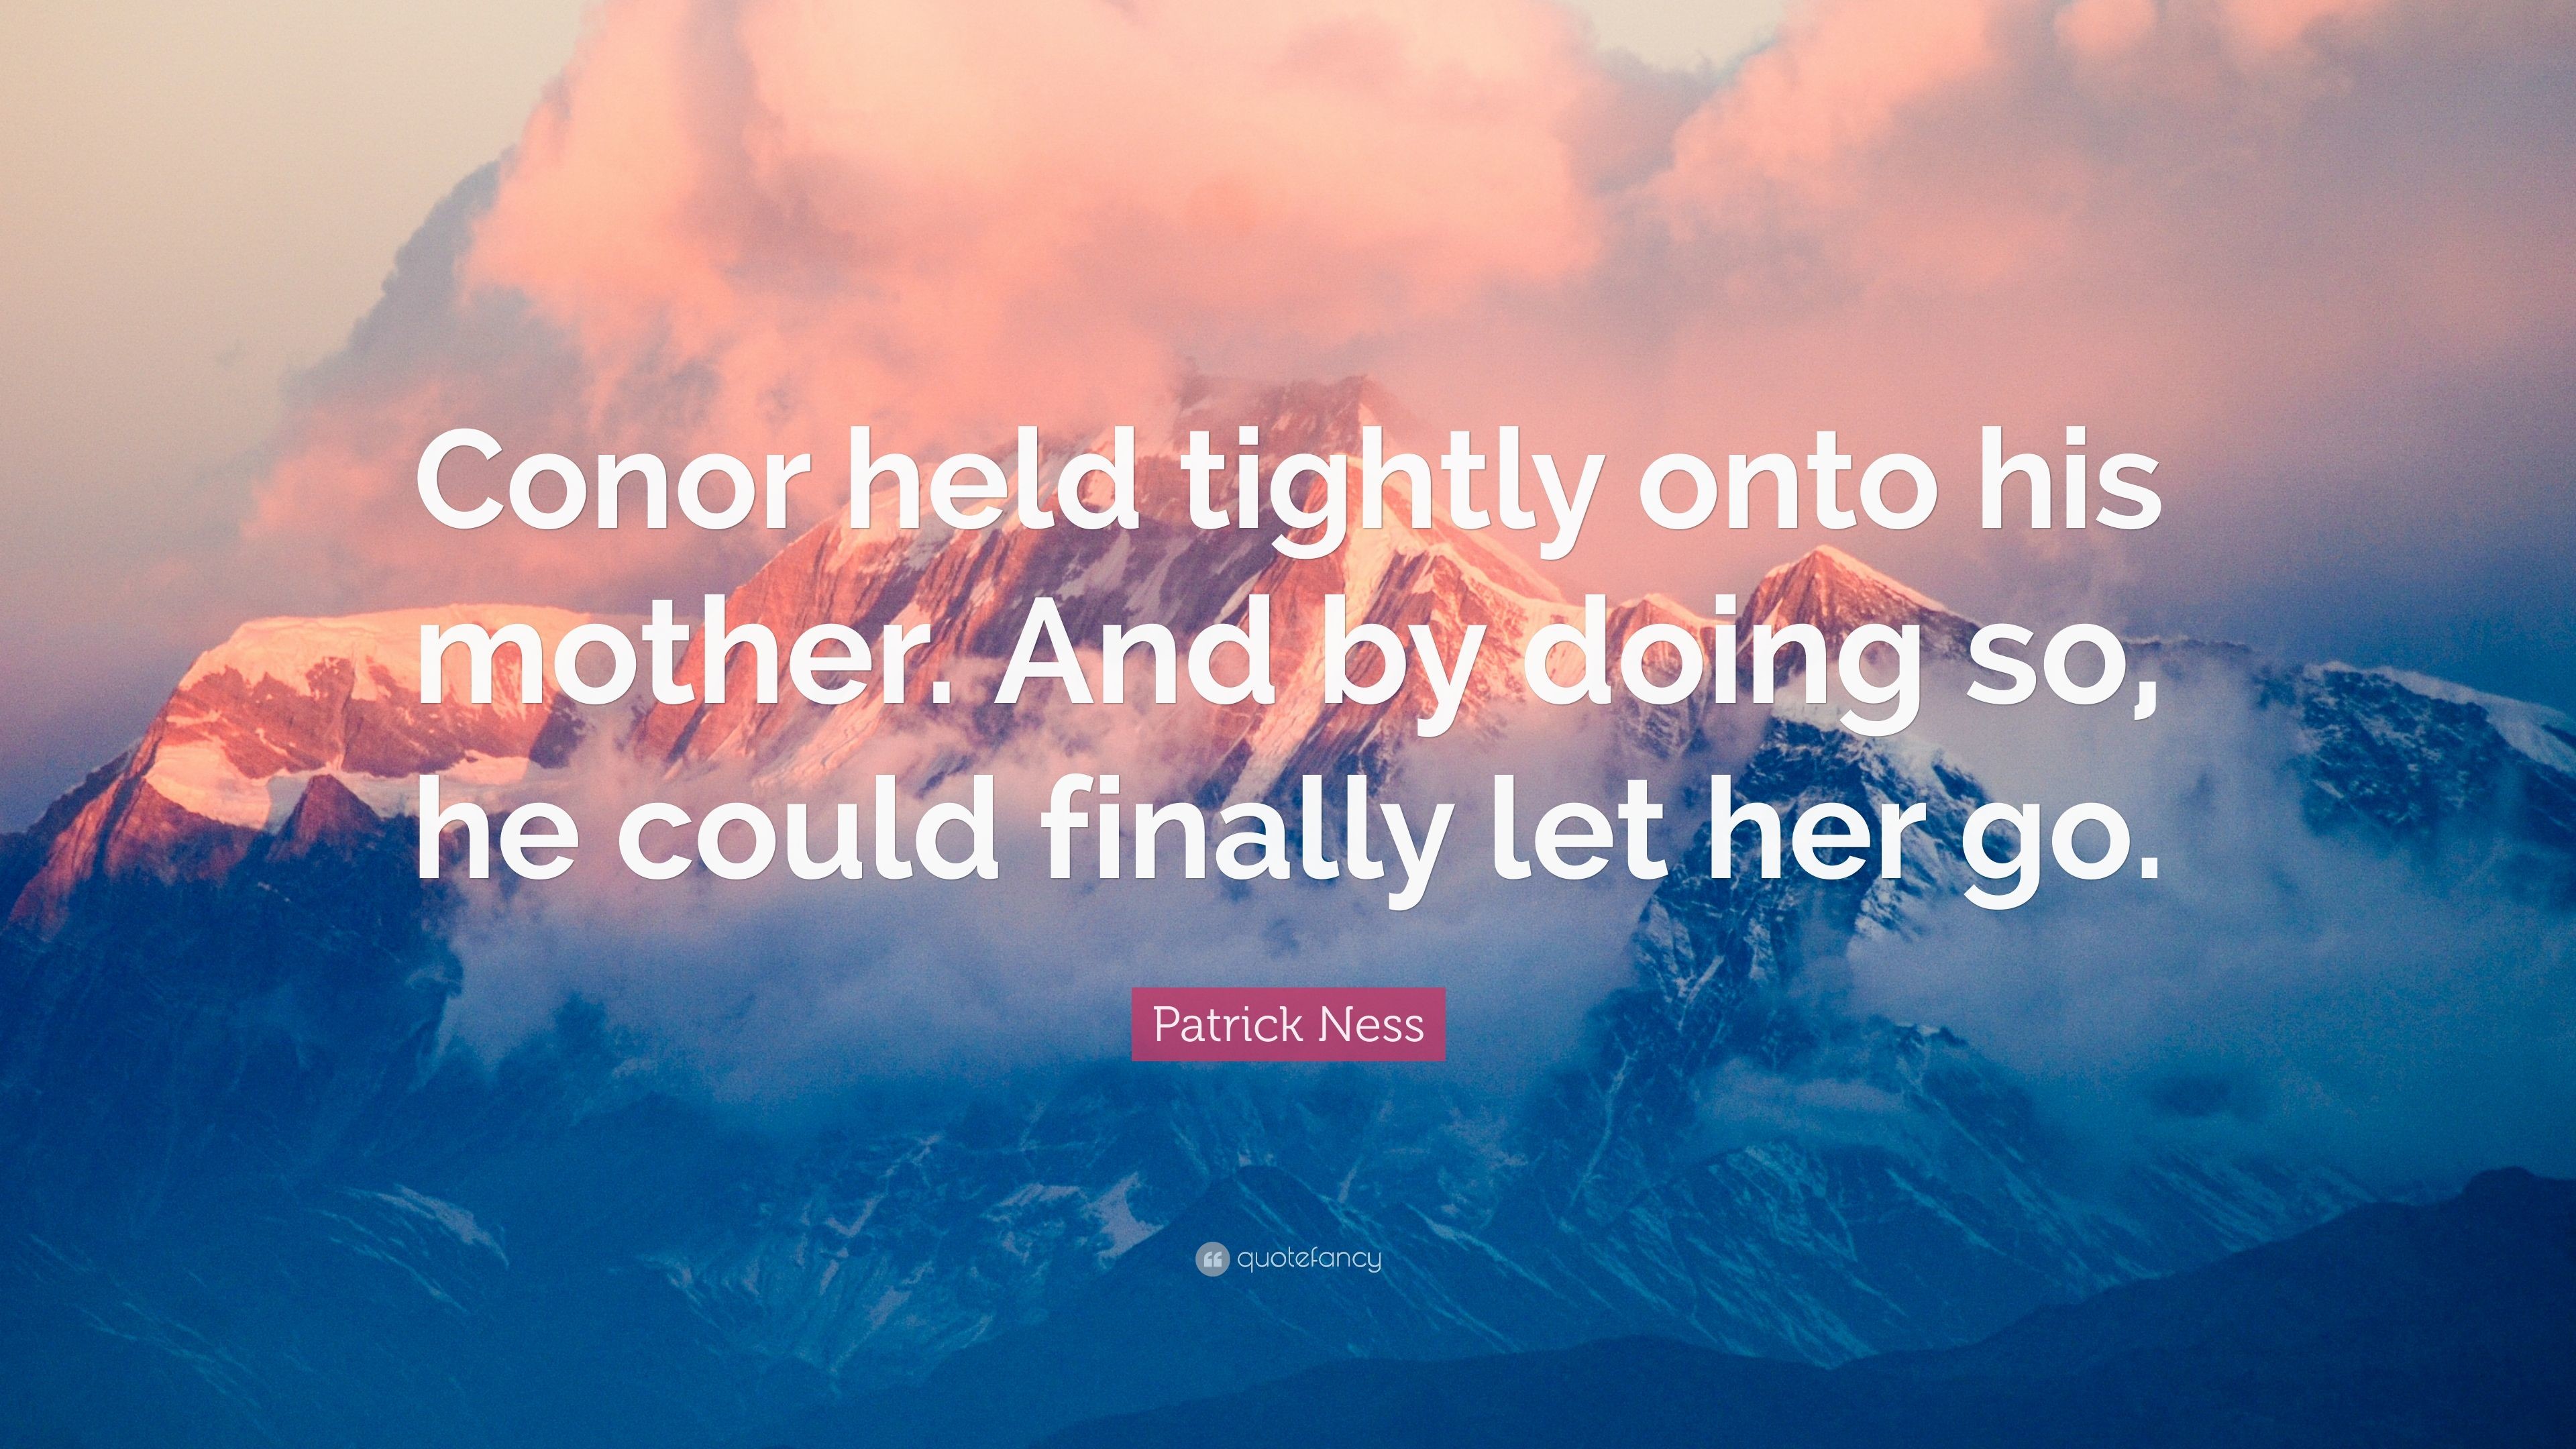 3840x2160 Patrick Ness Quote: “Conor held tightly onto his mother. And by doing so